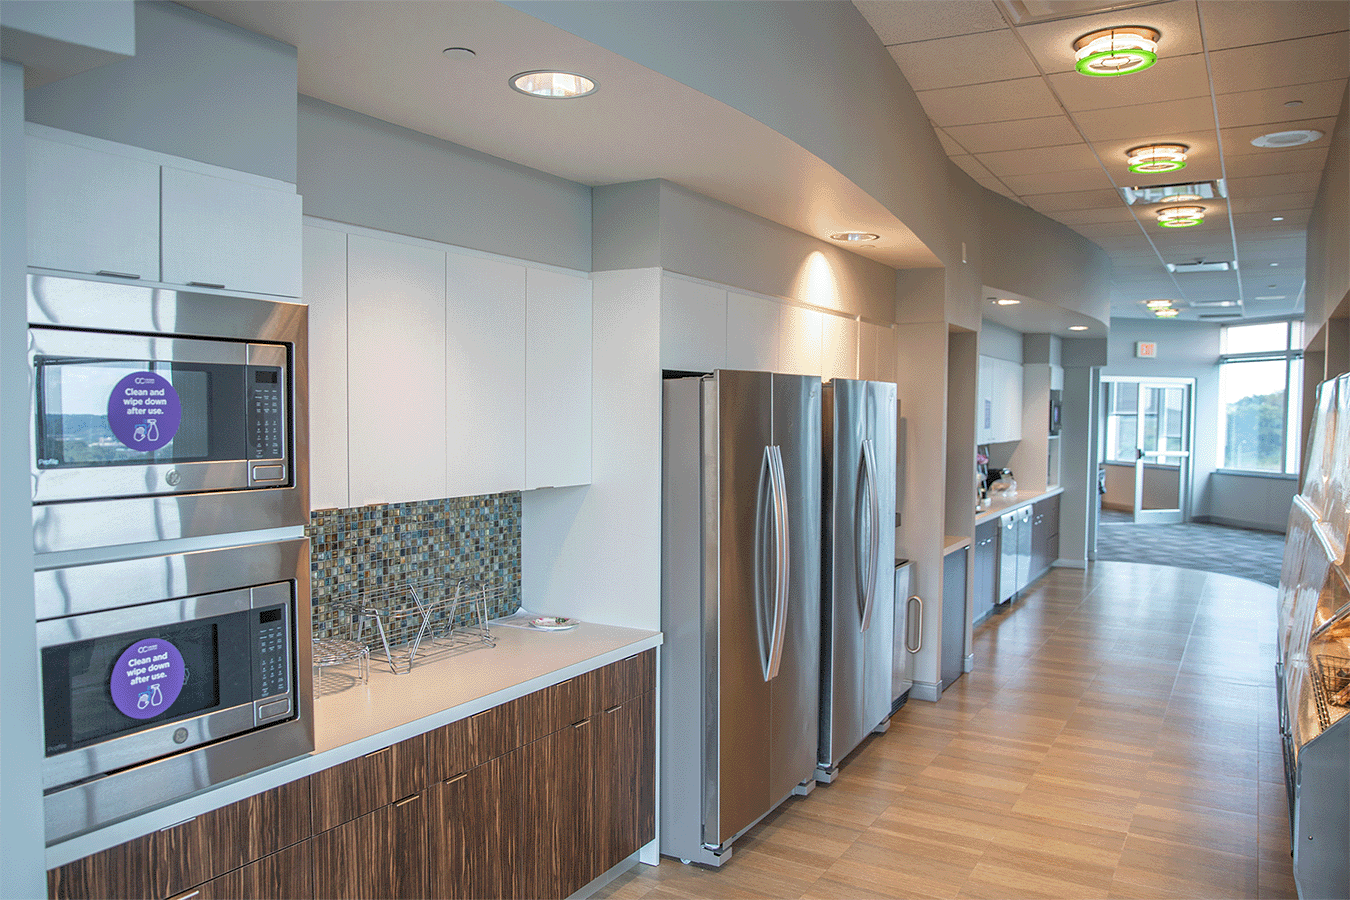 office kitchen with fridge microwaves and more